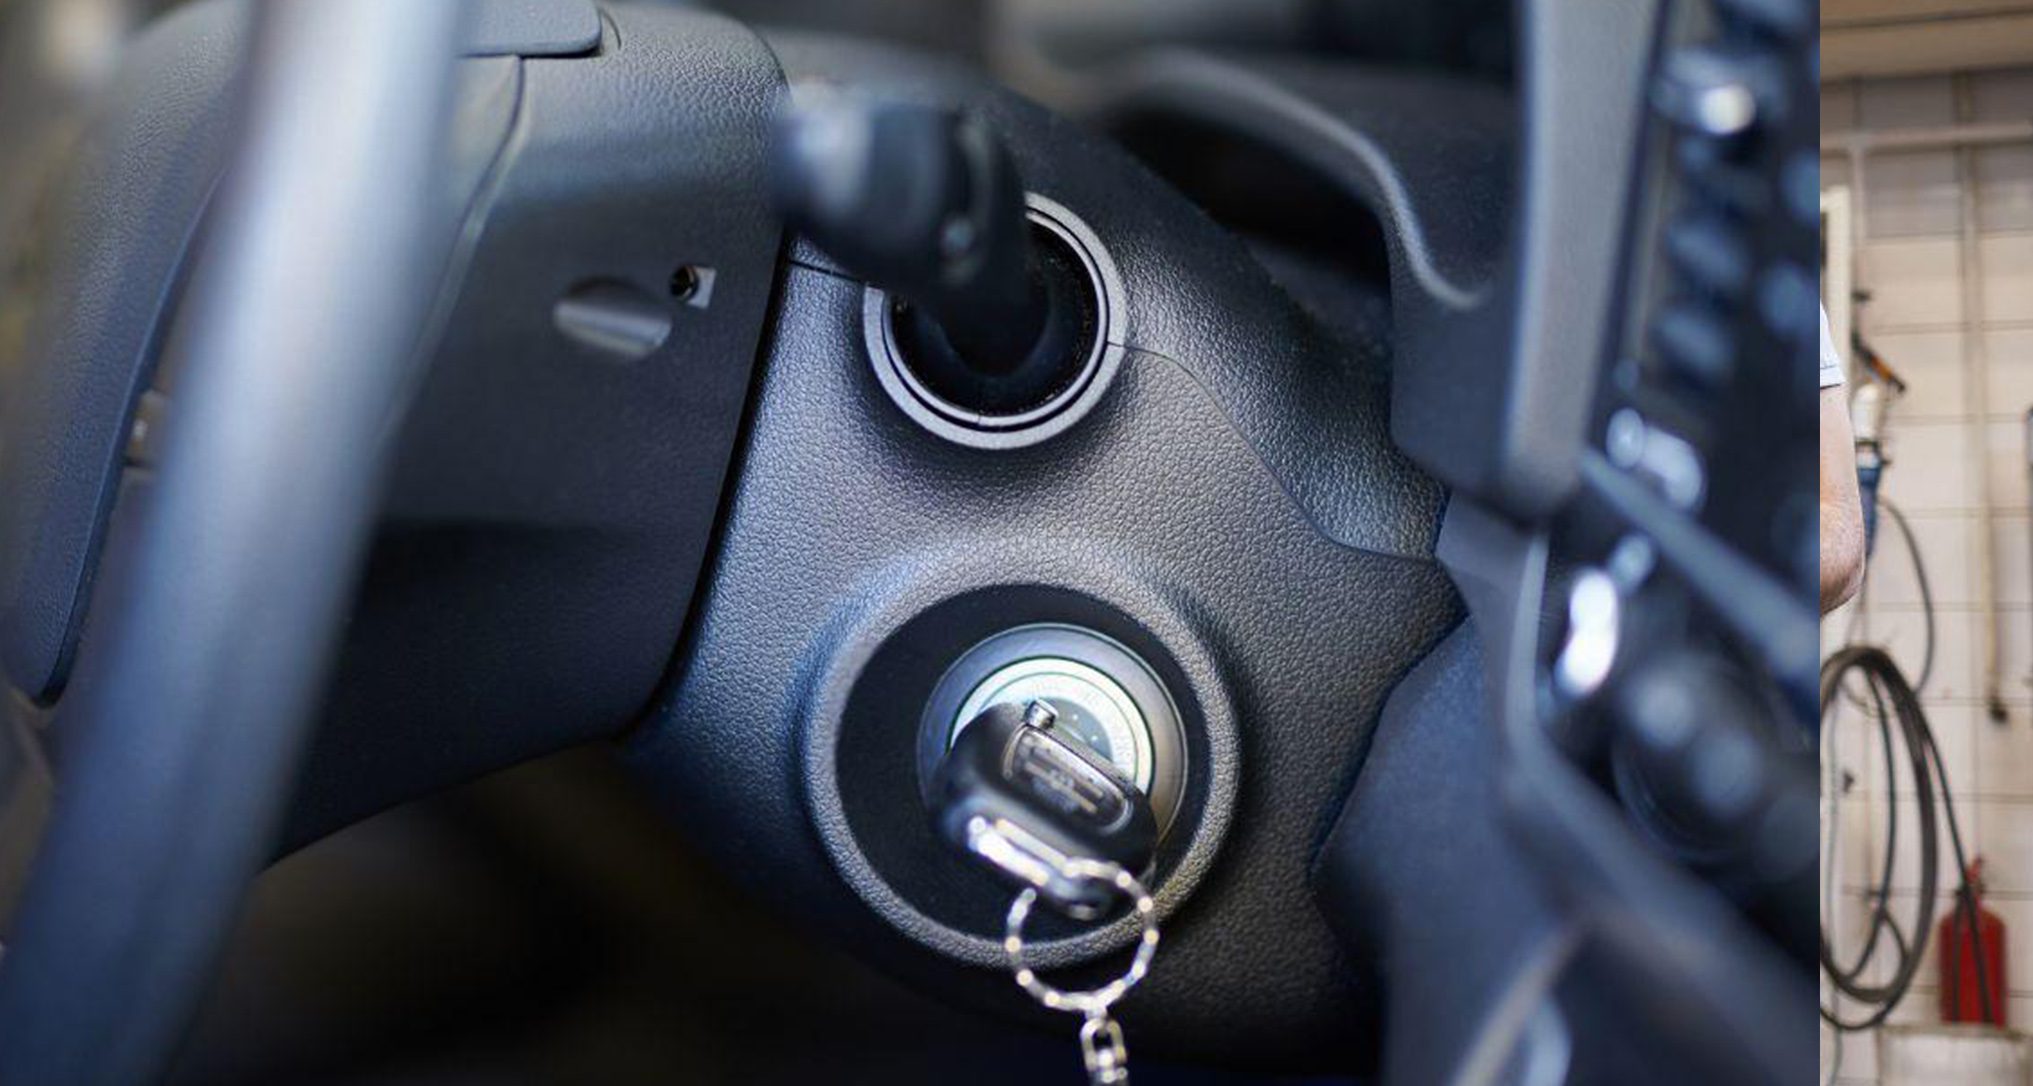 key in ignition of car